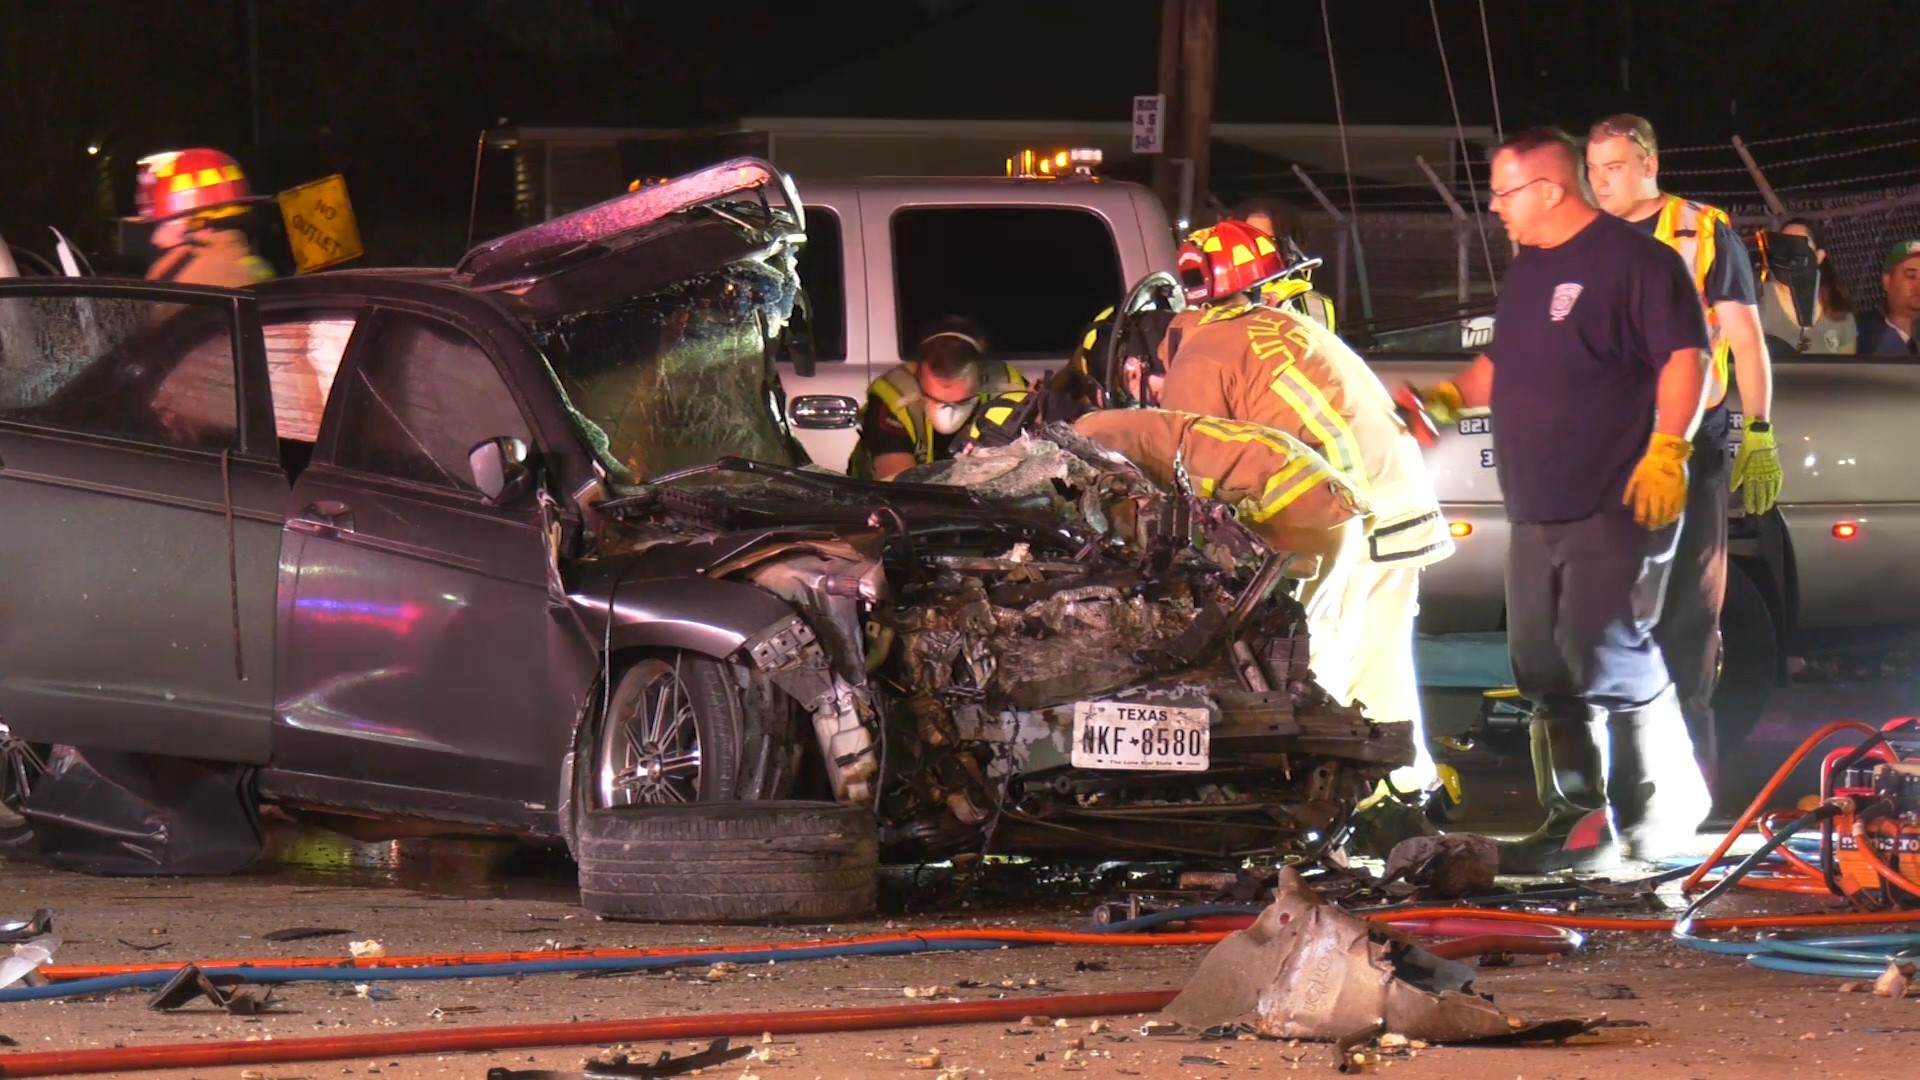 Deputies and firefighters responded to a crash late Sunday in north Harris County where an innocent driver was critically injured.